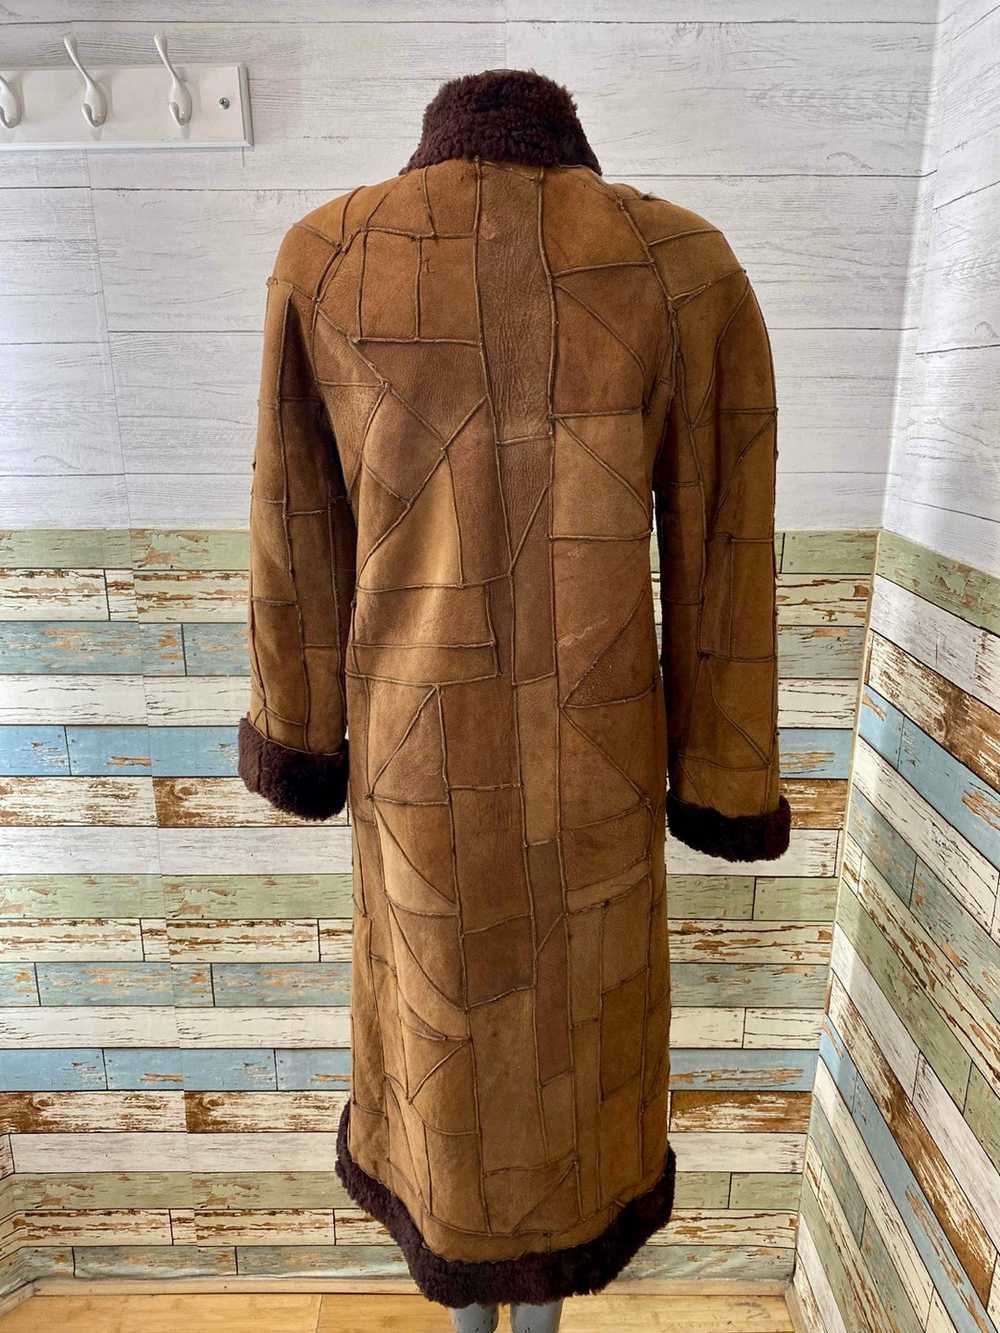 70s Brown Patchwork Shearling Coat - image 5